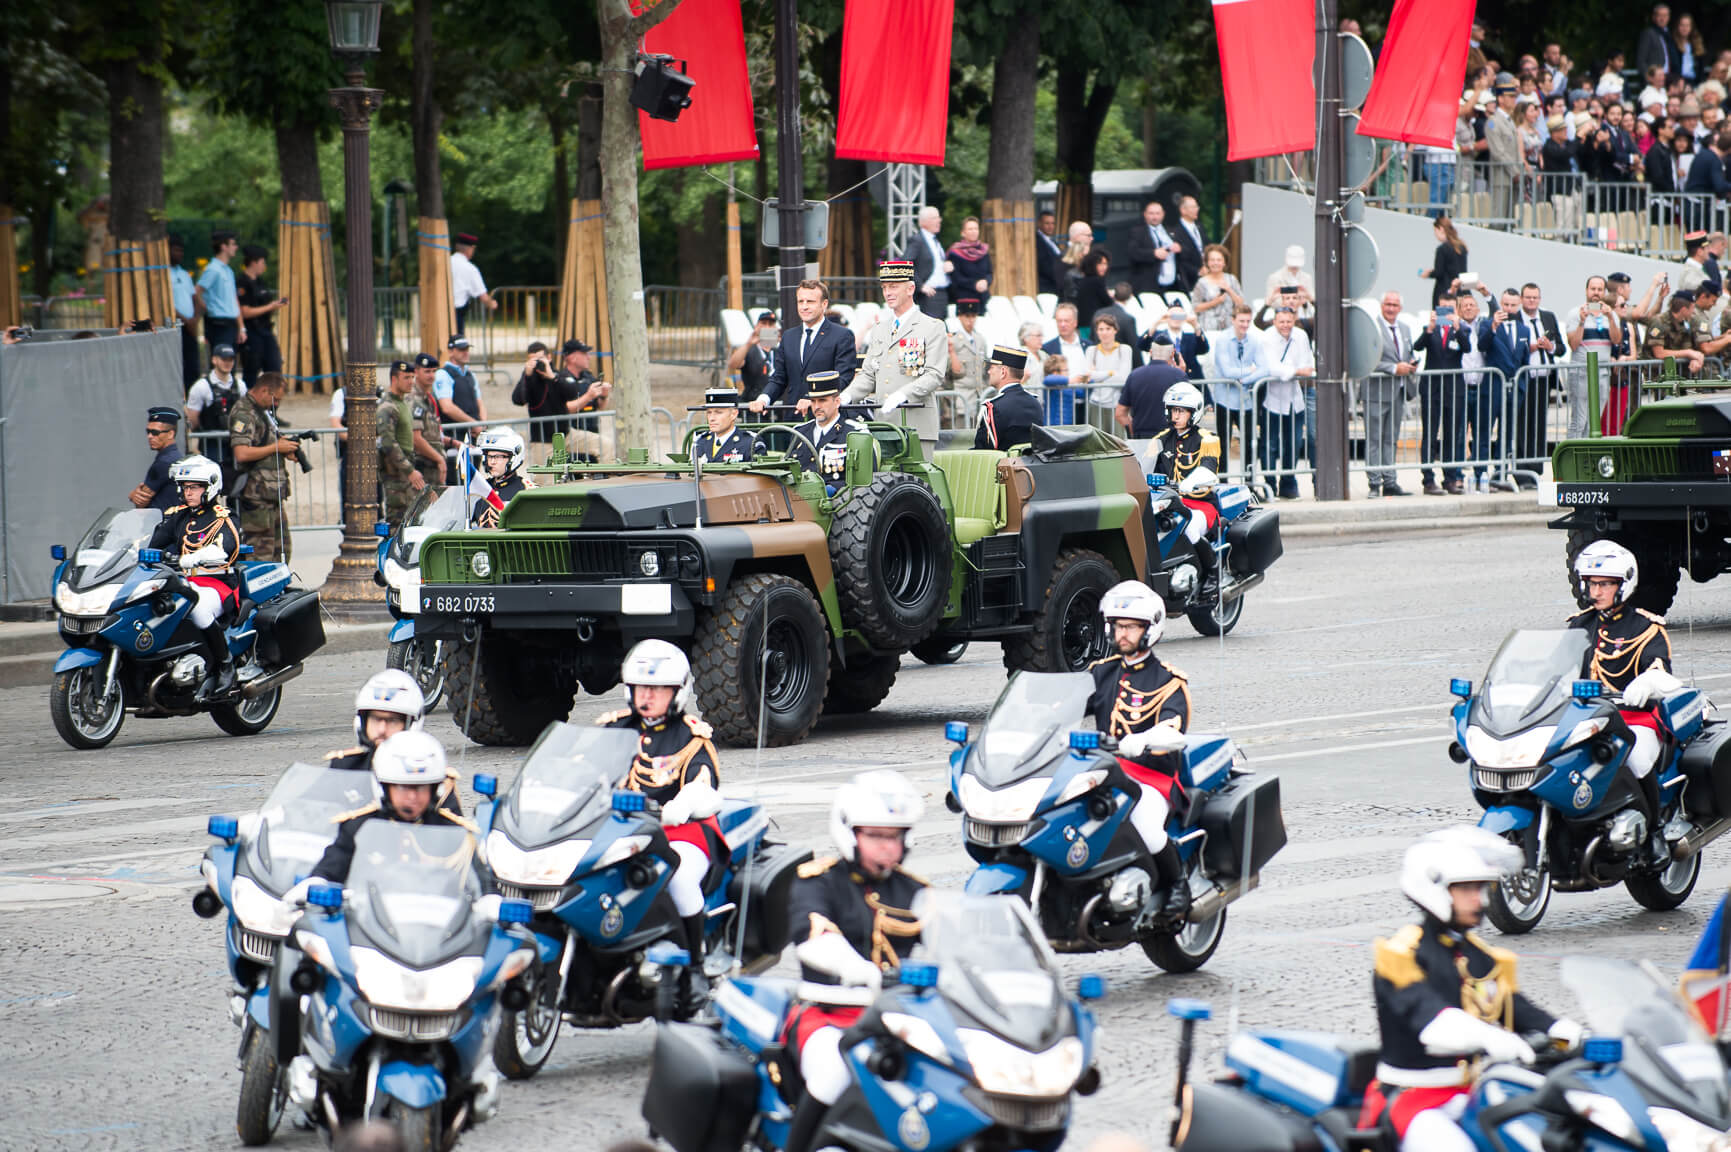 Bouemar - Arrival of President Emmanuel Macron of France at the Bastille Day parade in 2019. NATO